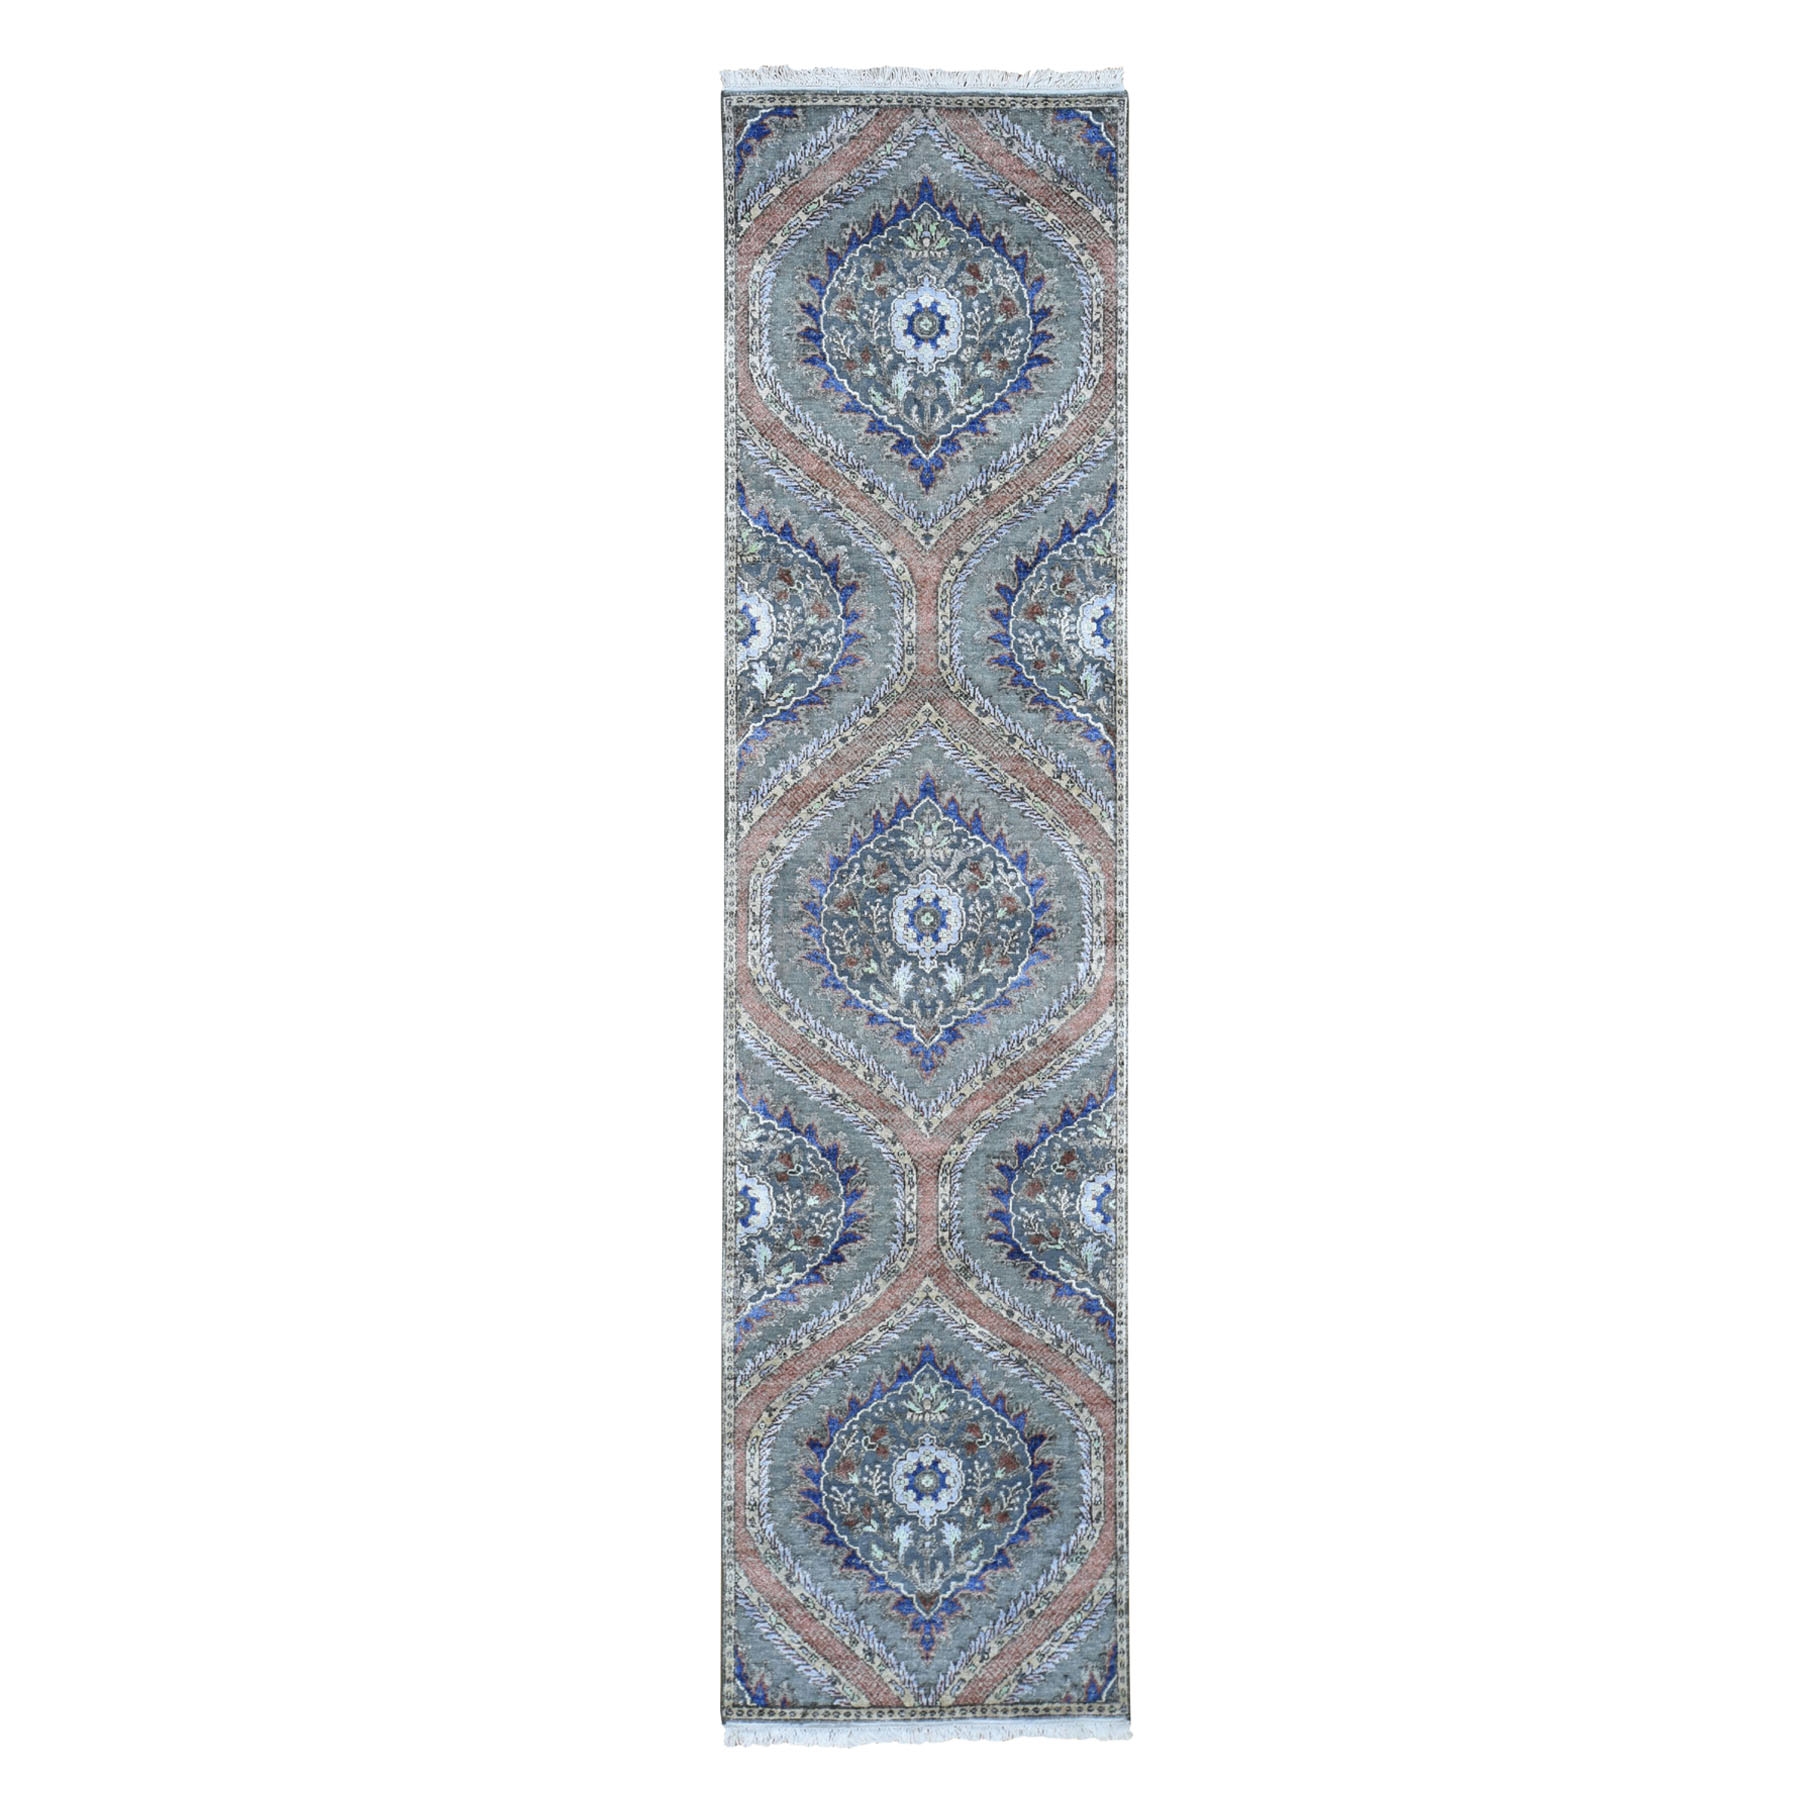 2'6"X10' Mughal Design Pure Silk With Textured Wool Runner Hand Knotted Oriental Rug moad8e90